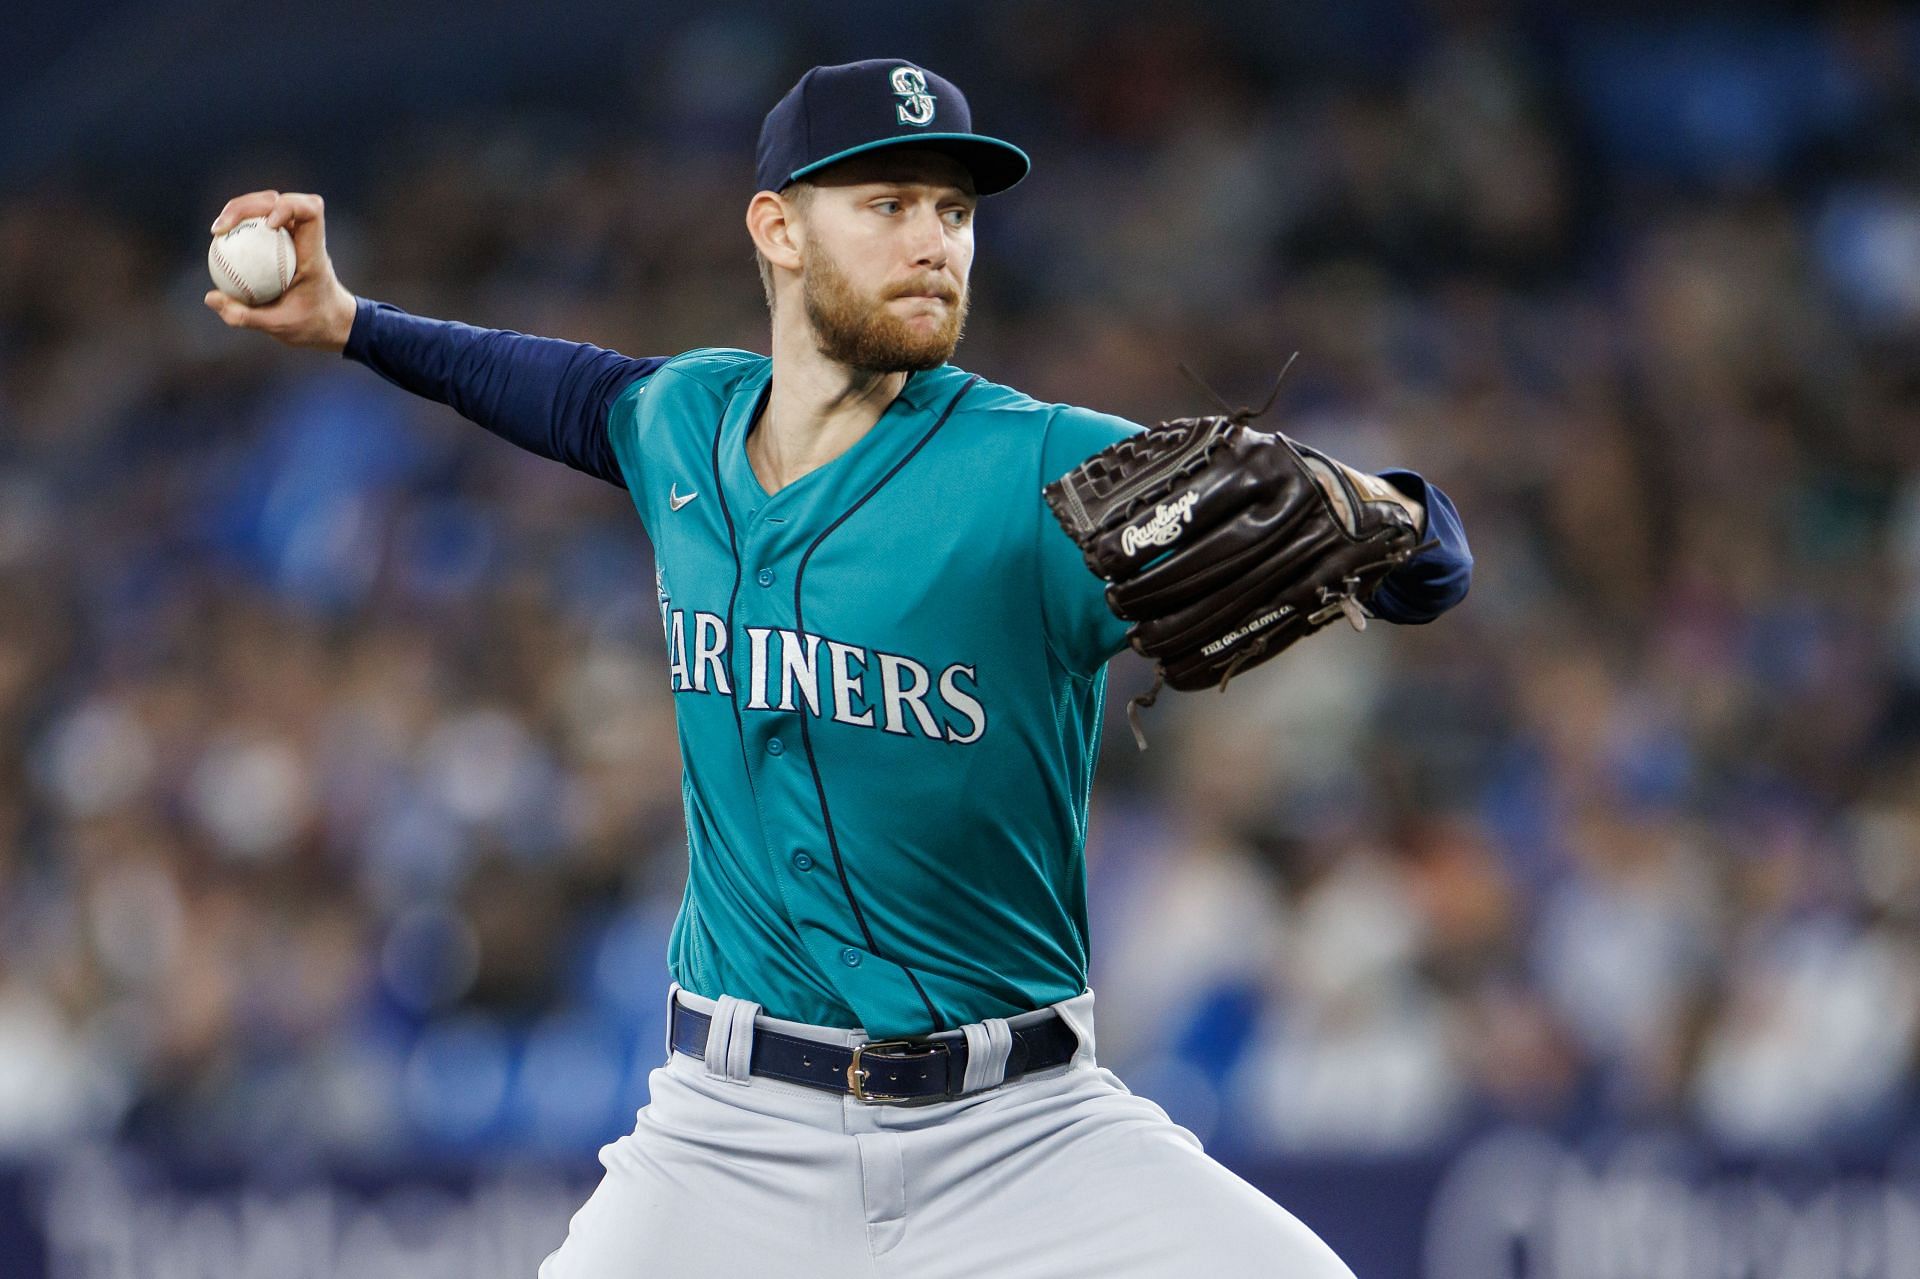 Buckle Up, Seattle Mariners' Fans, These Last Games Of The 2023